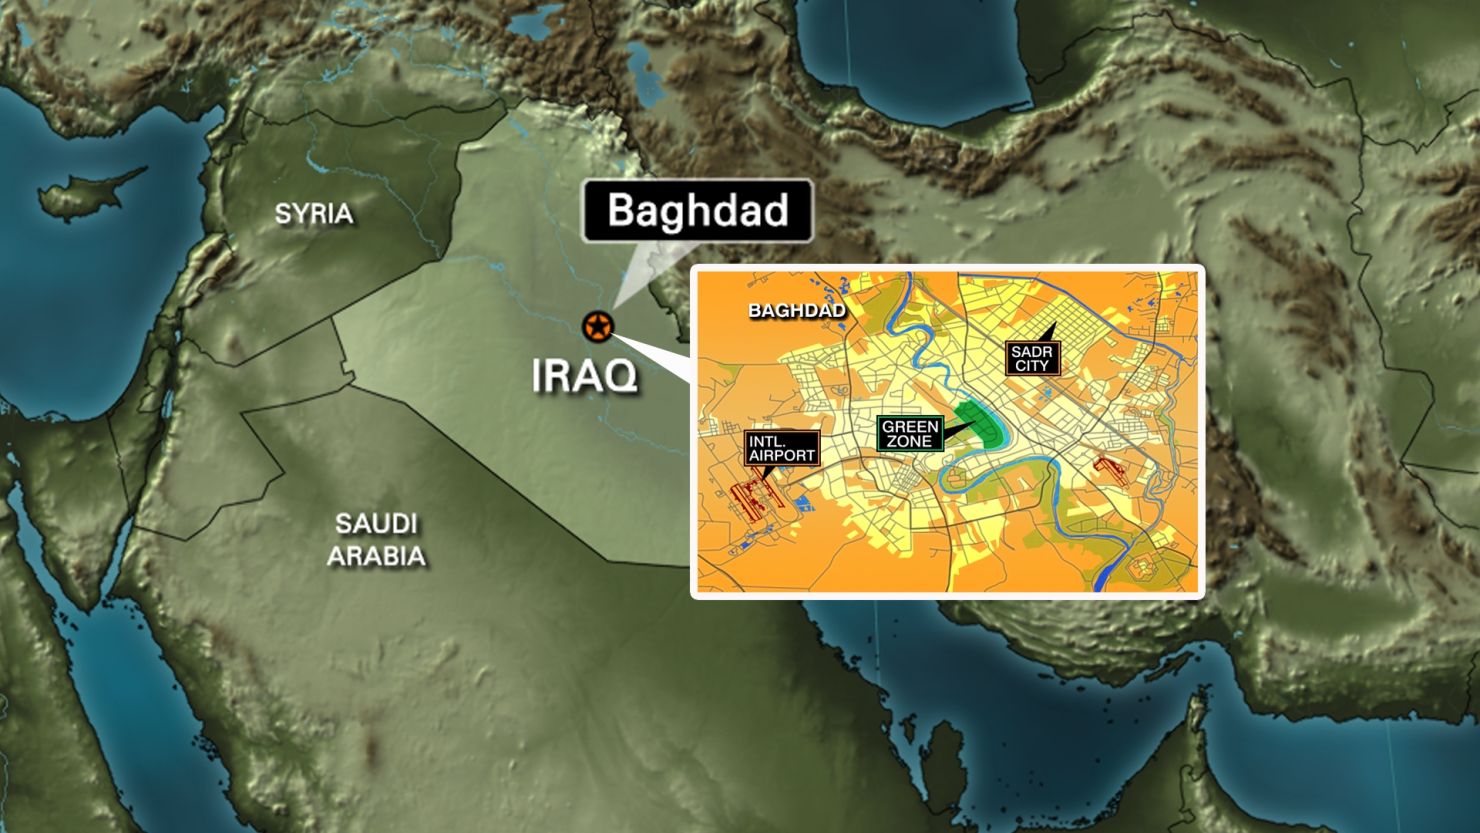 The Green Zone was carved out of central Baghdad by U.S.-led forces after the invasion of Baghdad in 2003.